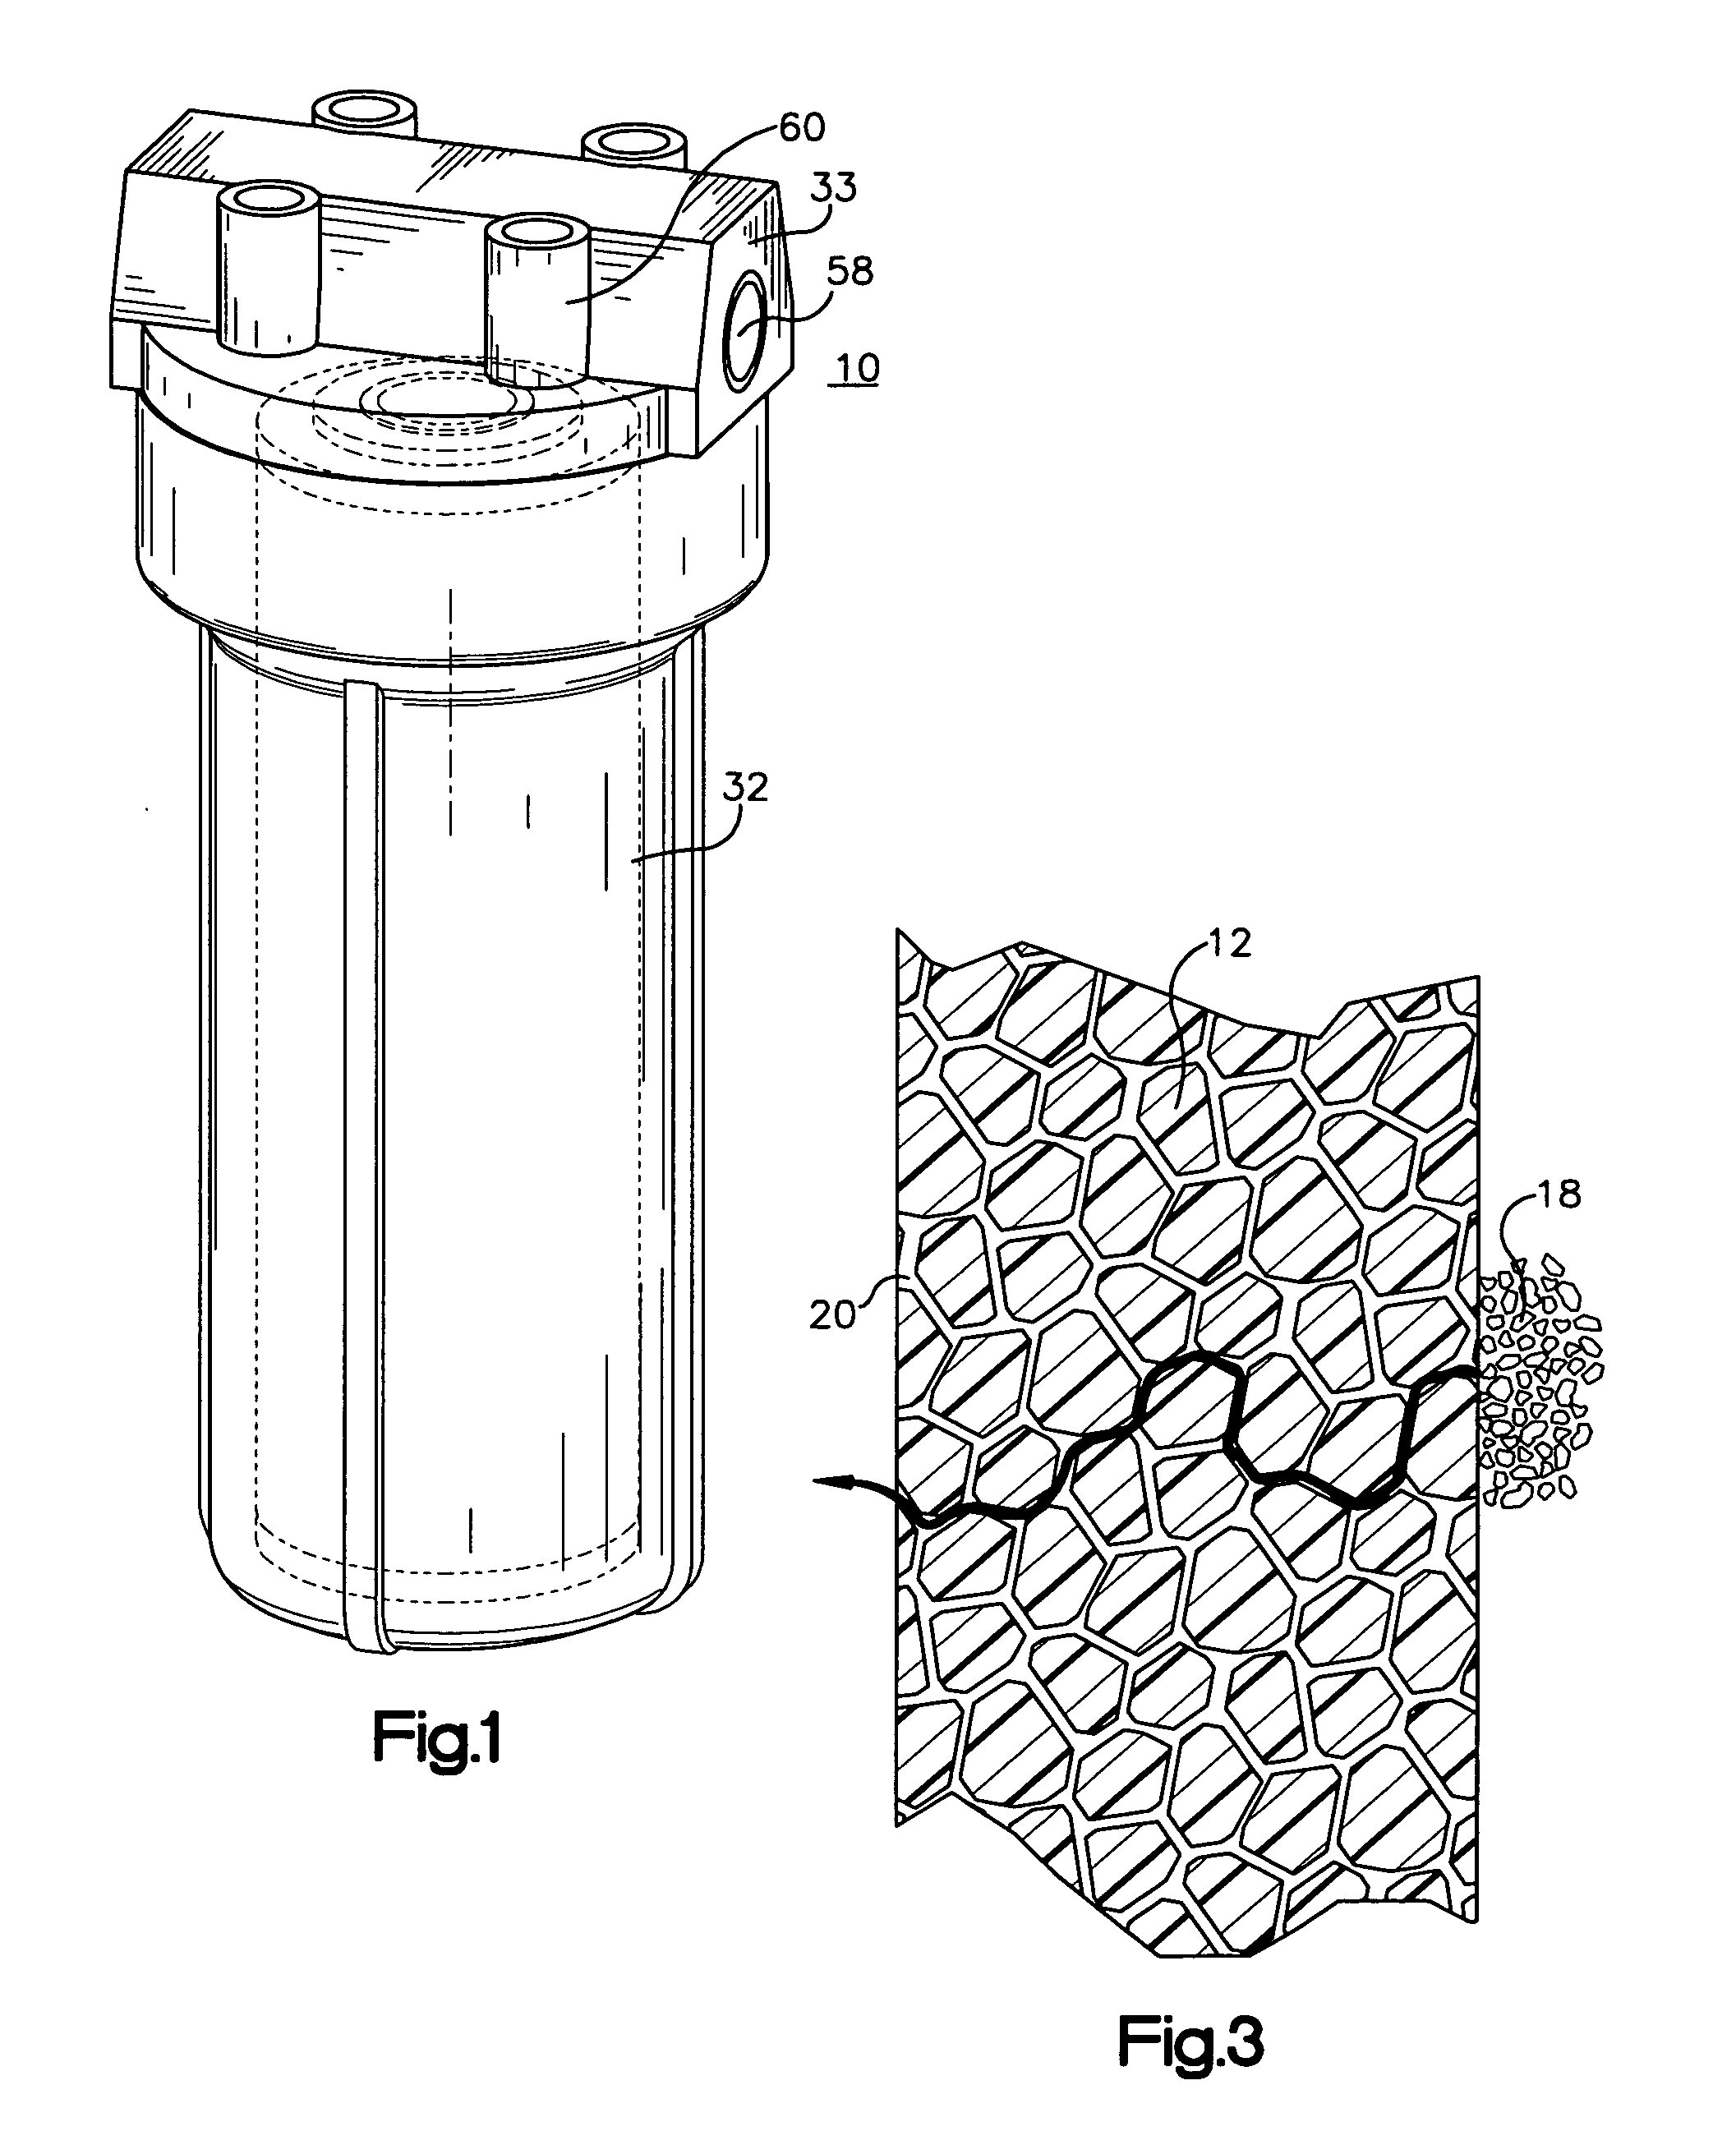 Treatment of liquid using porous polymer containment member